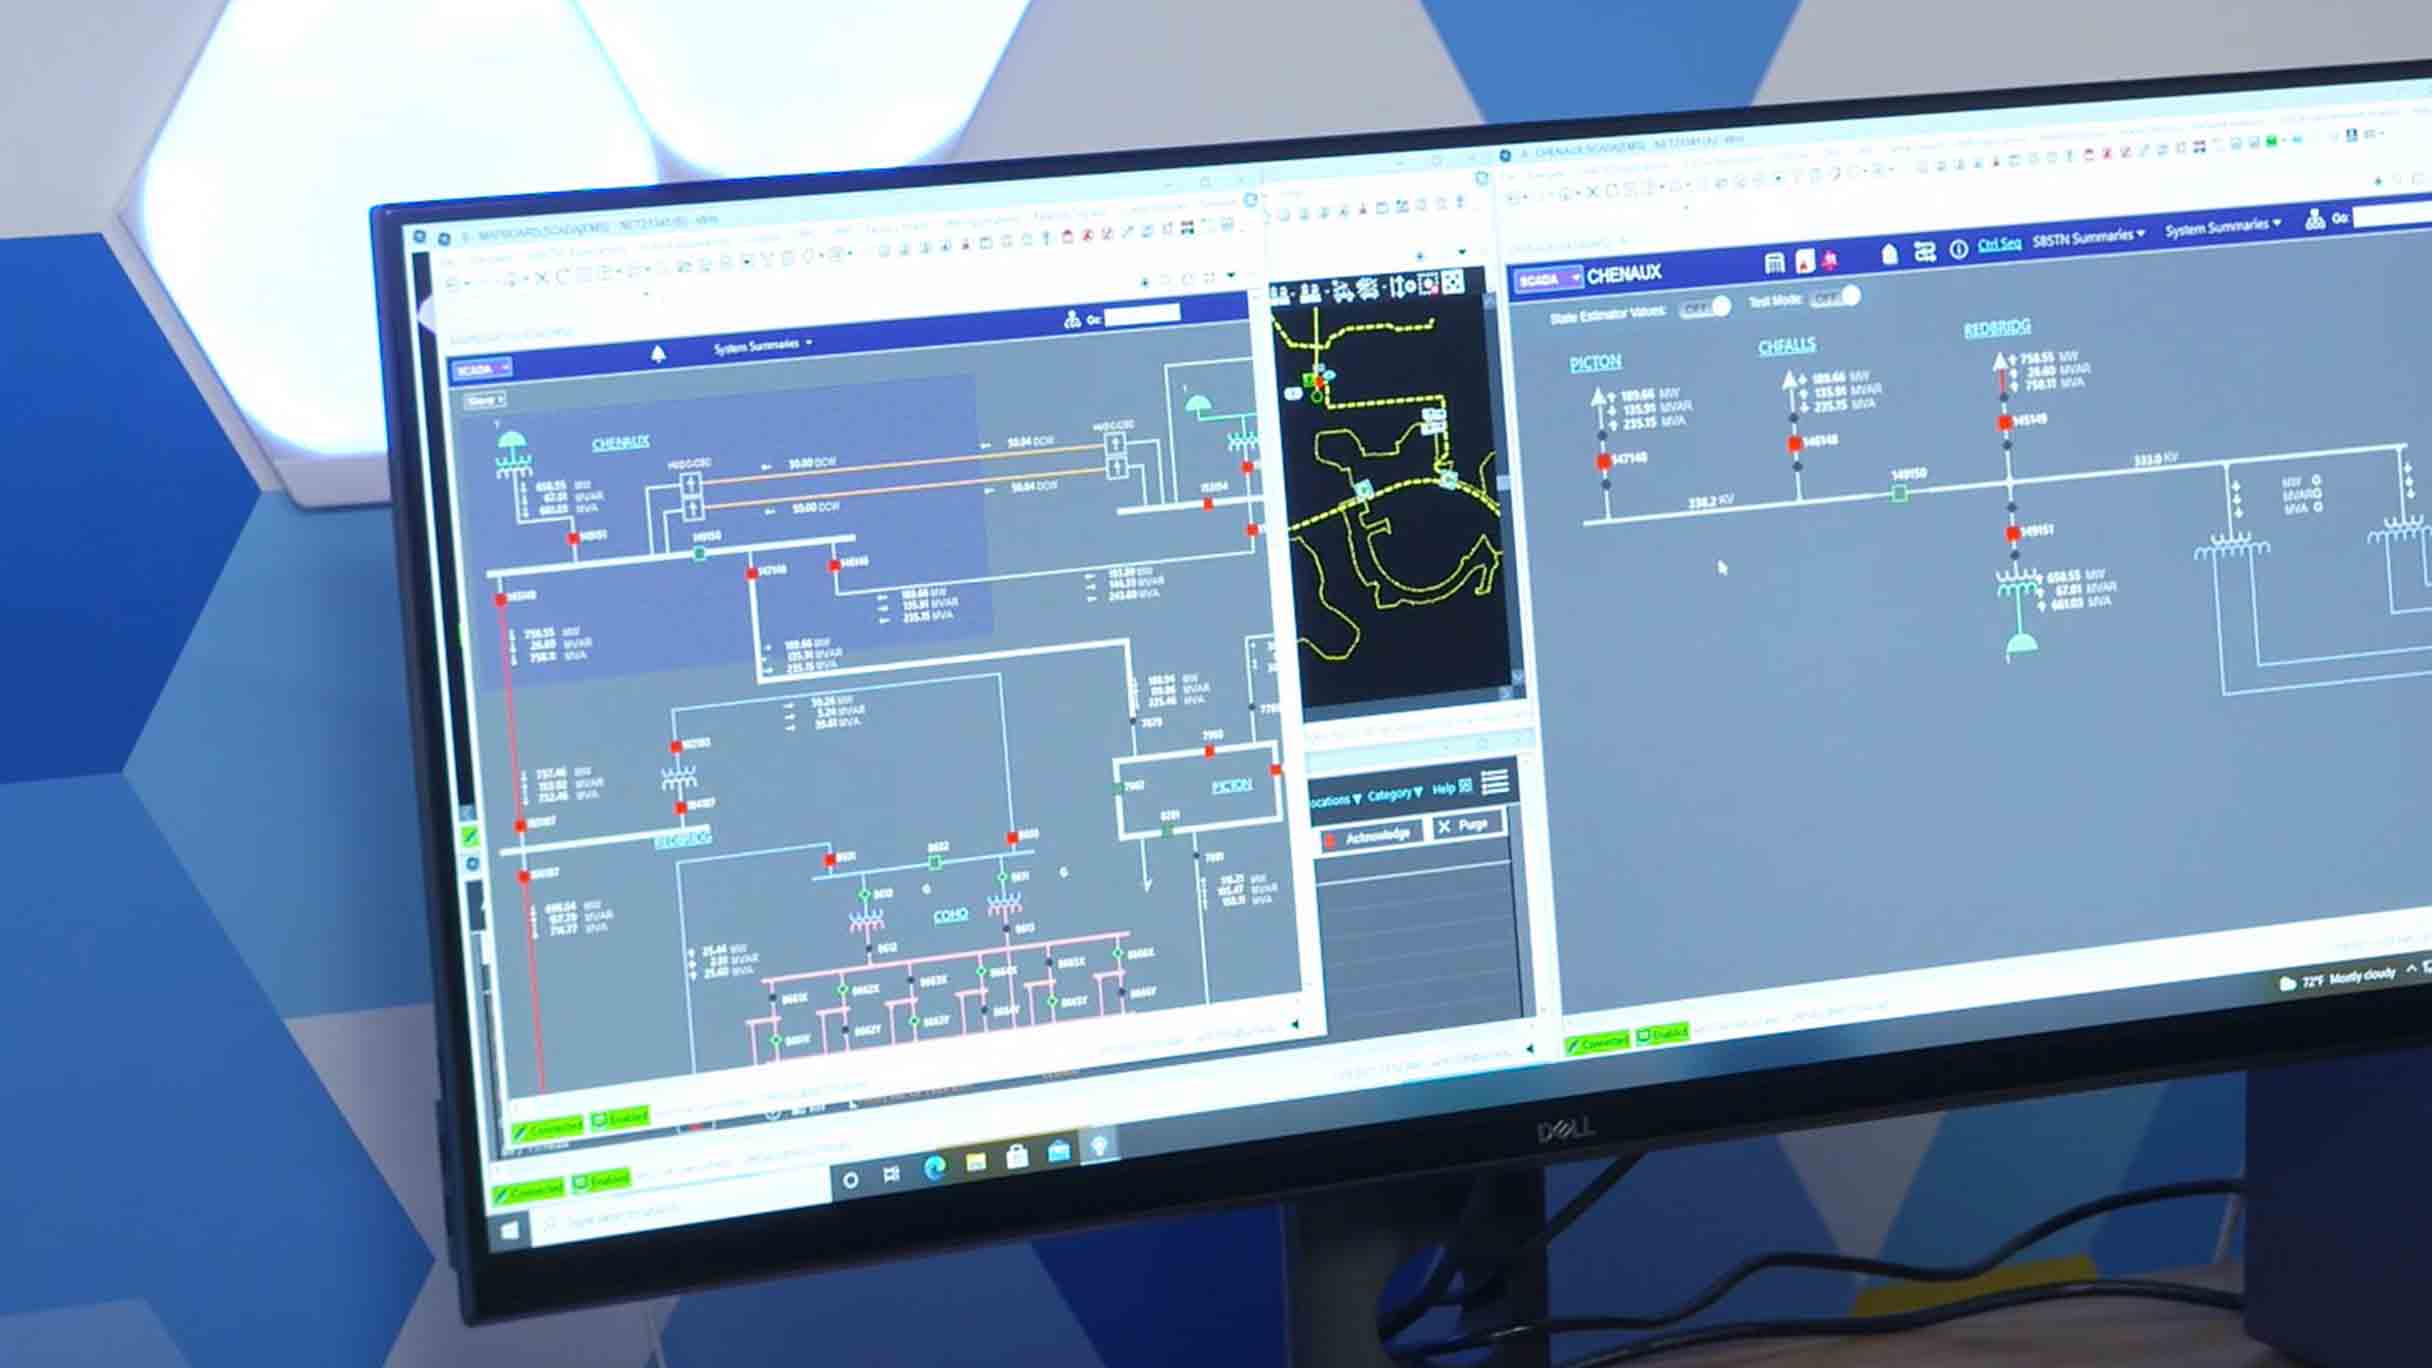 UCF students will get hands-on experience with control room technology, including GE Digital’s ADMS software. These future grid engineers will enter the energy workforce ready to help tackle the challenges of the energy transition. Image courtesy of FPL.